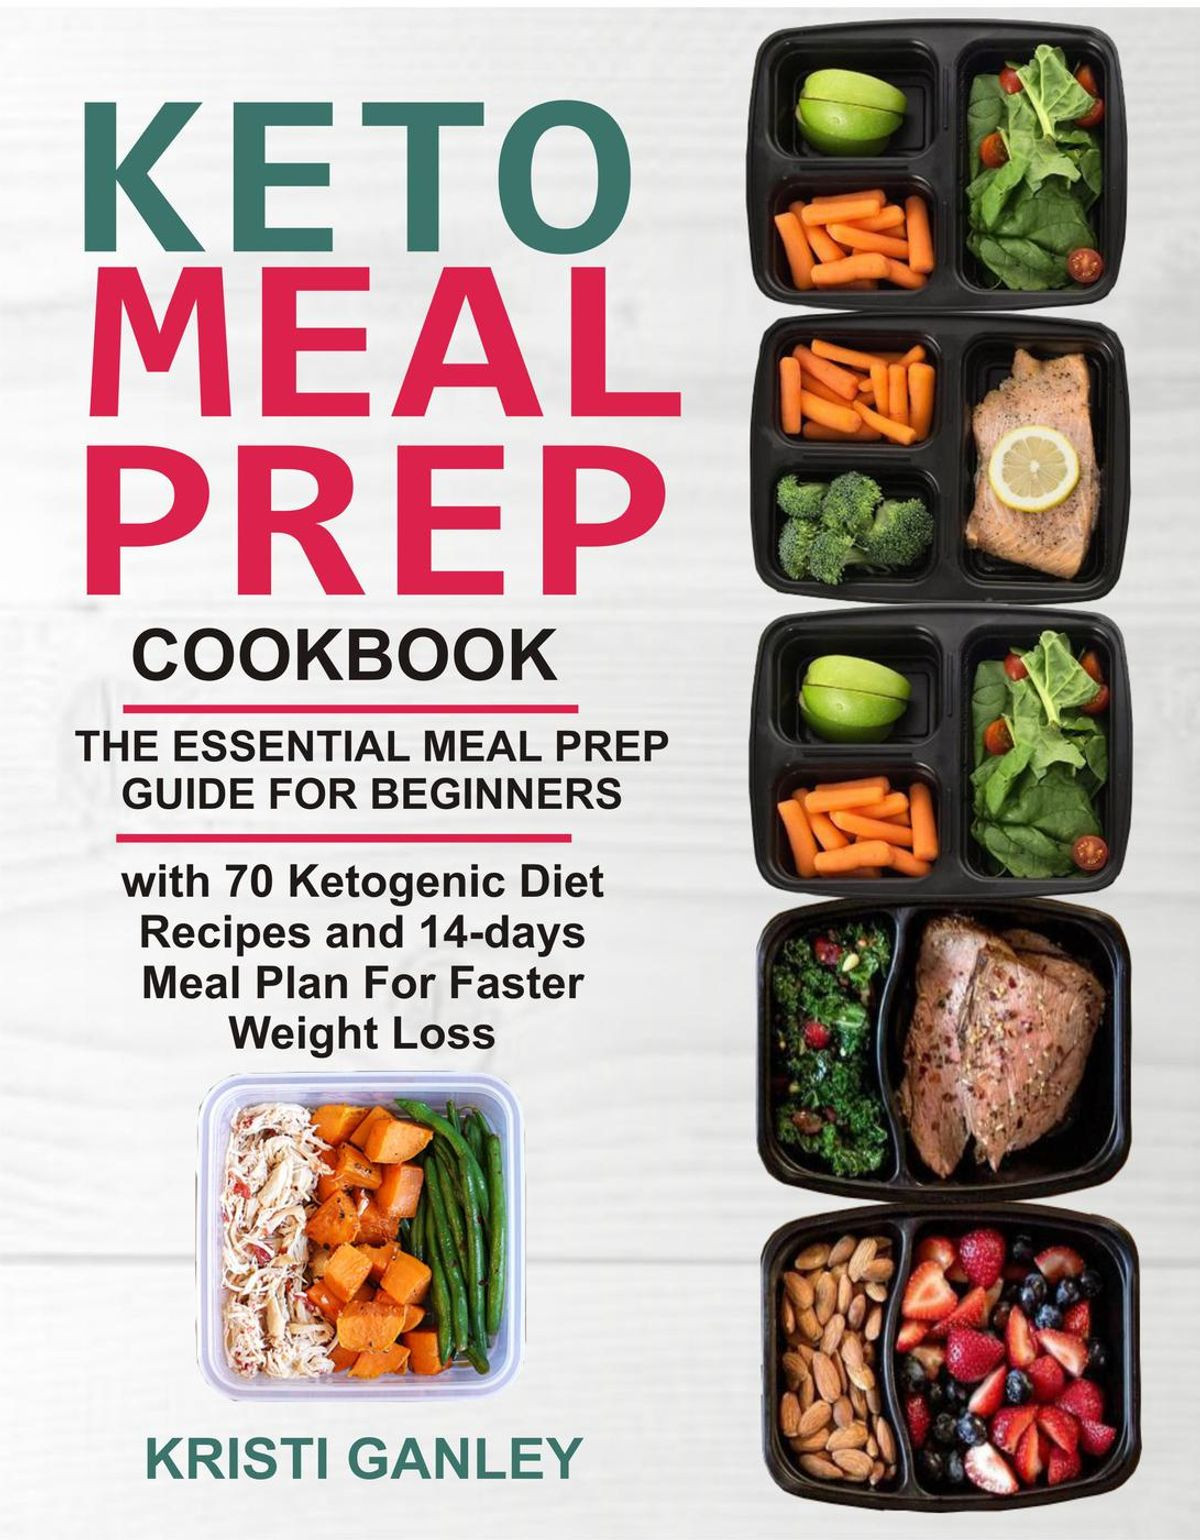 Keto Diet For Beginners Meal Prep
 Keto Meal Prep Cookbook The Essential Meal Prep Guide for